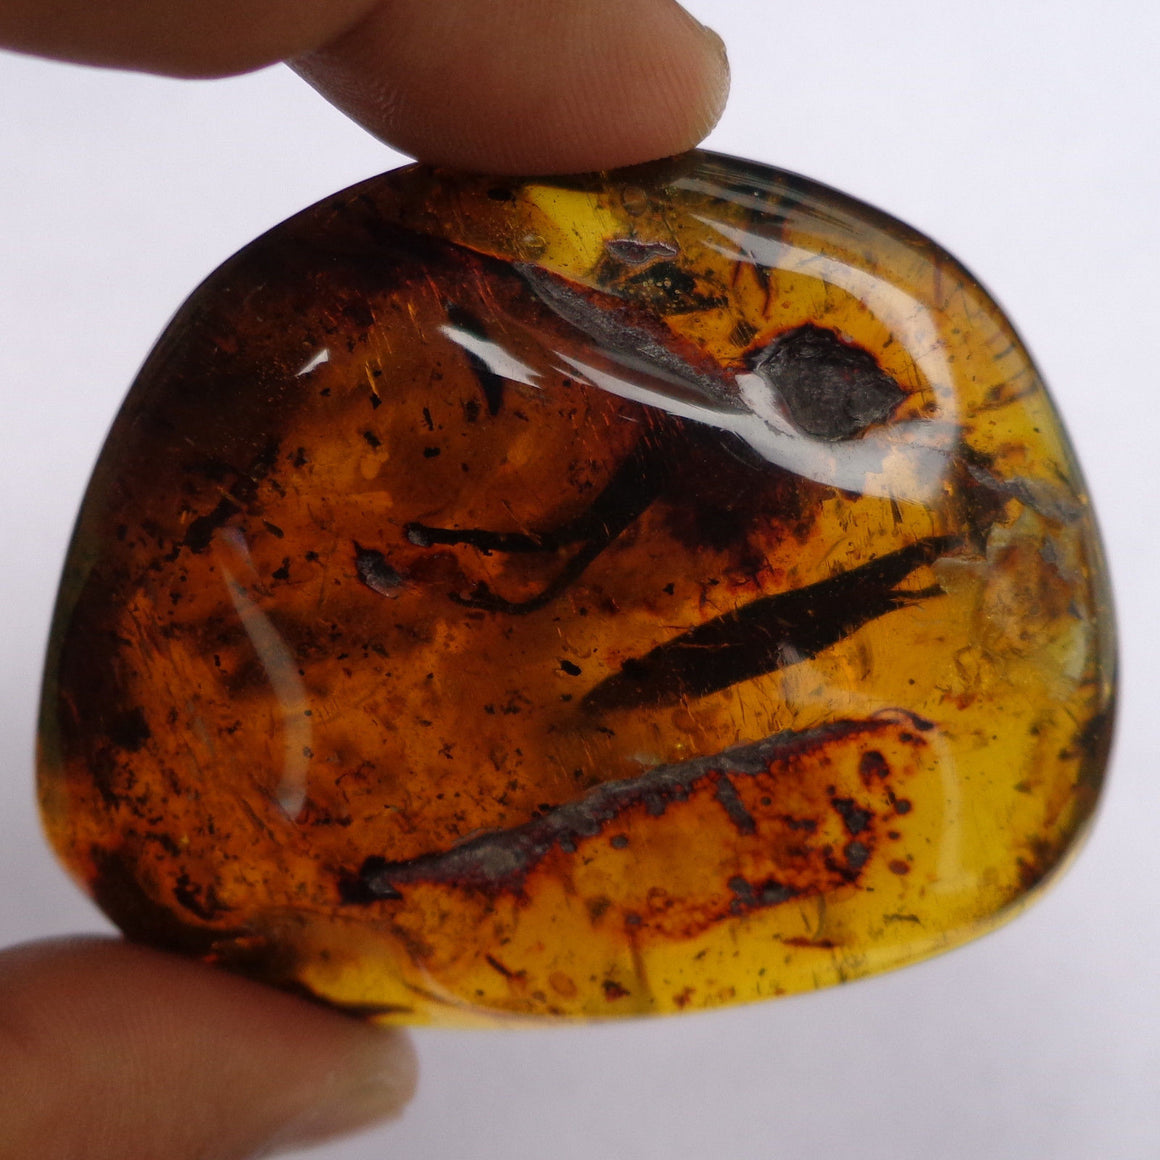 Rare Mexican Amber Stone Flower Petals inclusion Full Polished 46.5g